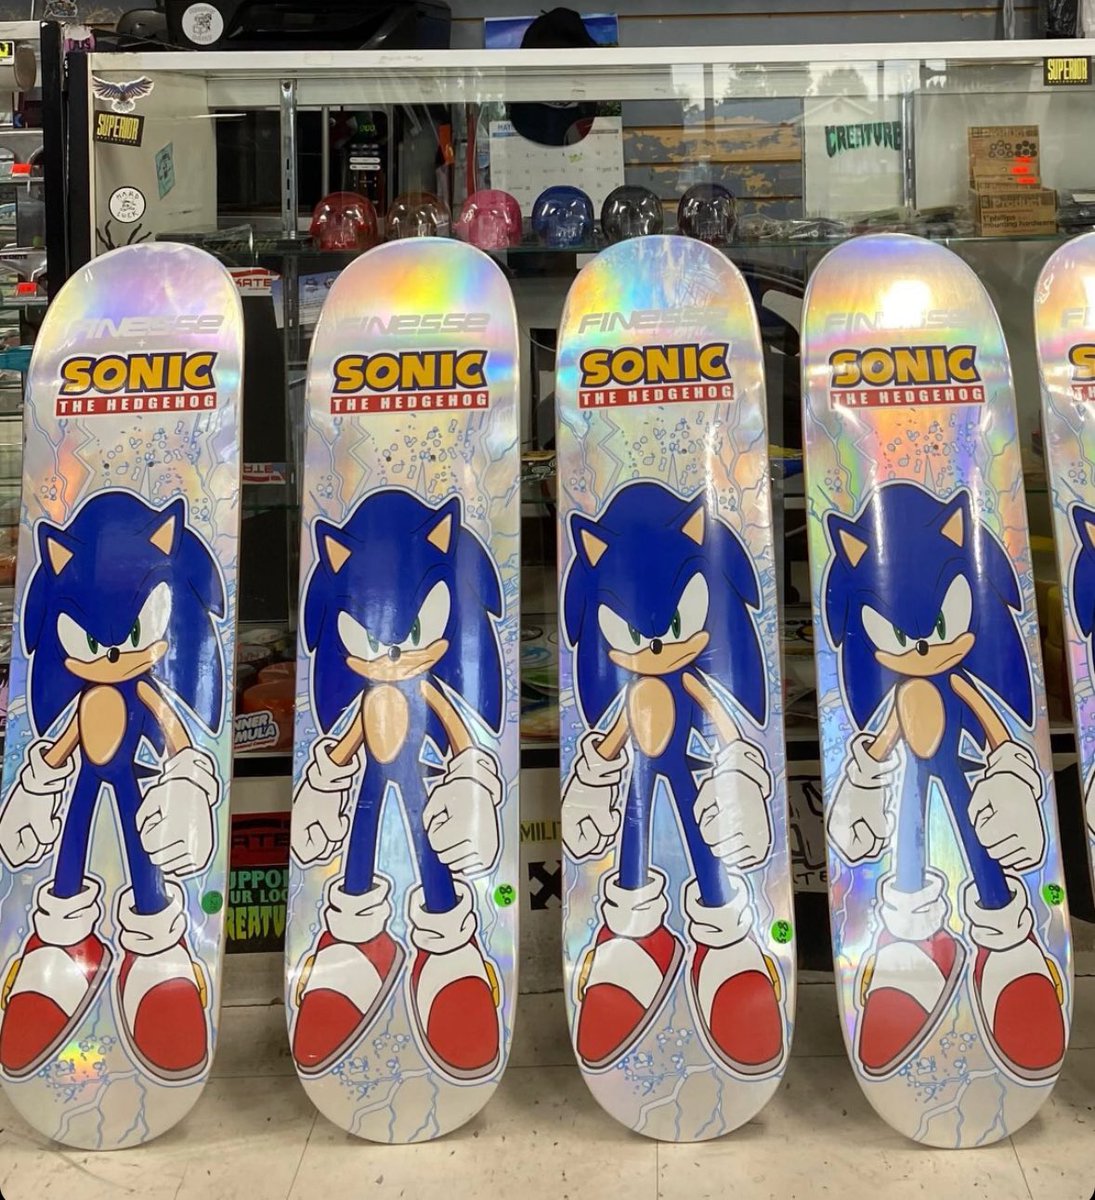 Skate7Skateshop on Instagram has posted some pictures of Sonic the Hedgehog HOLO SKATEBOARDS made for FinesseBrand!

Wondering if/when we'll see these available for purchase! 💙👀